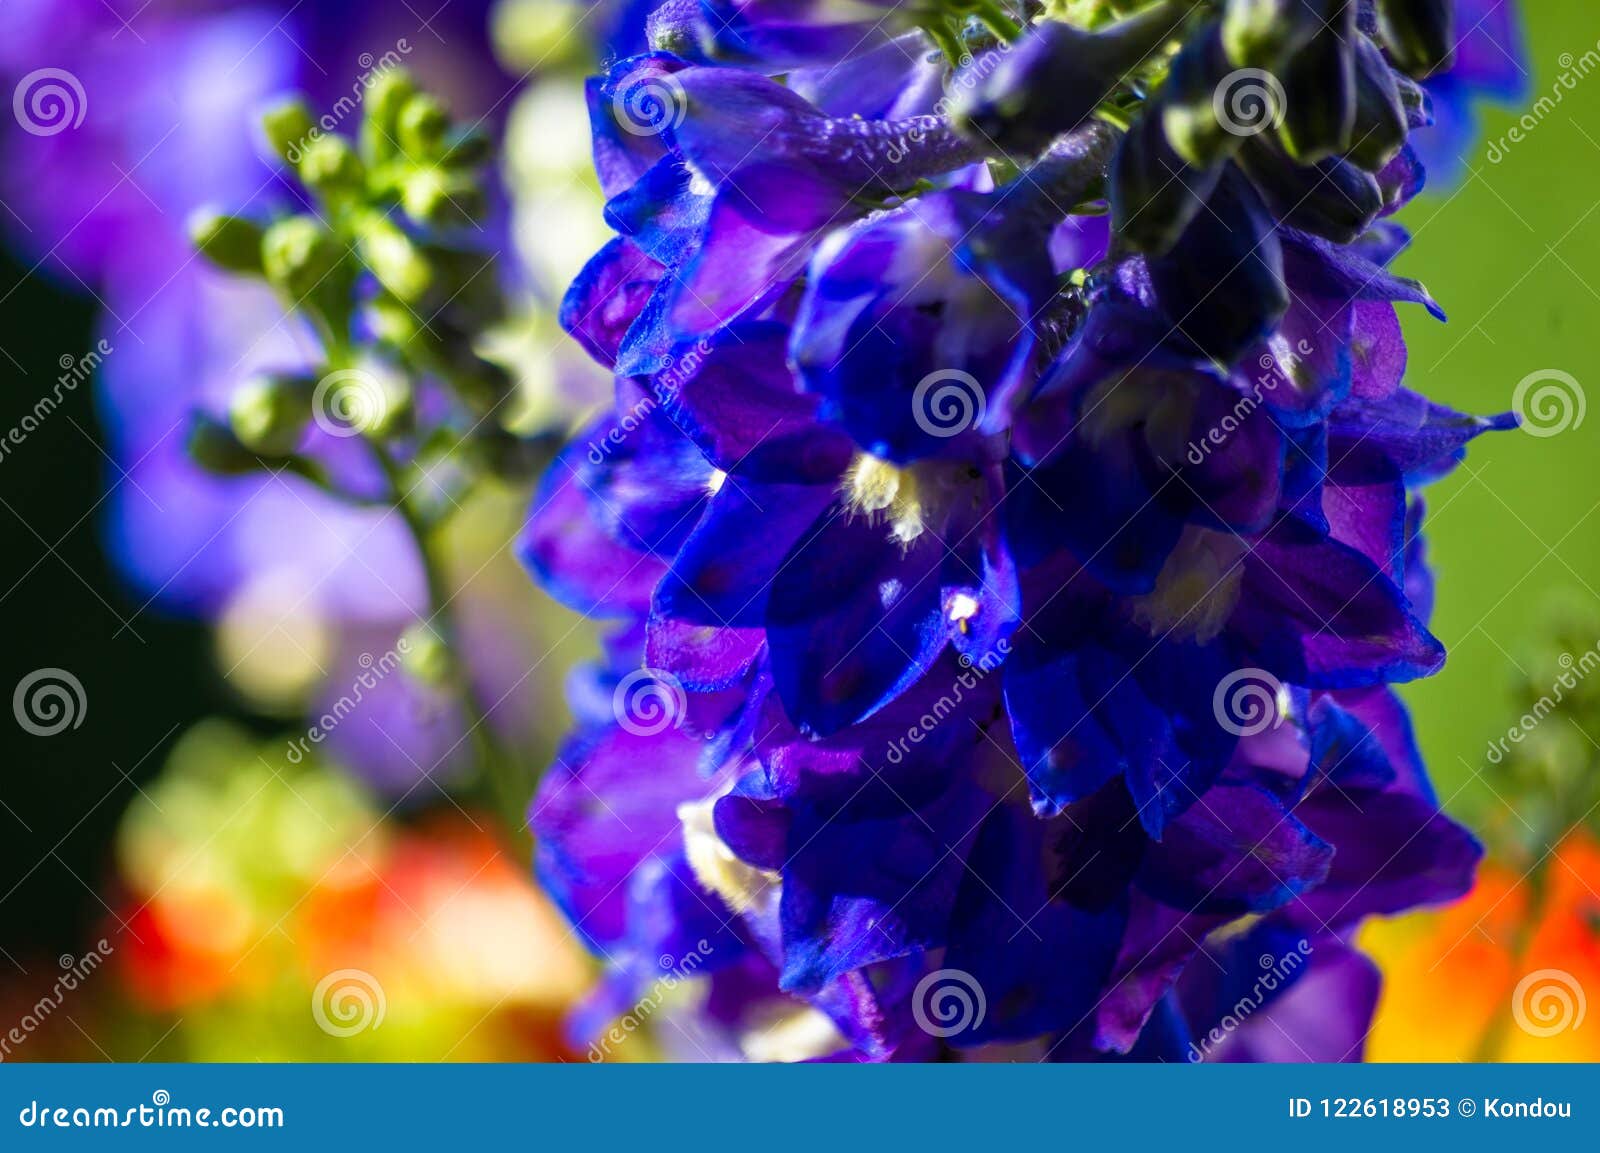 A Bouquet of Bright Spring Flowers of Various Types Stock Image - Image ...